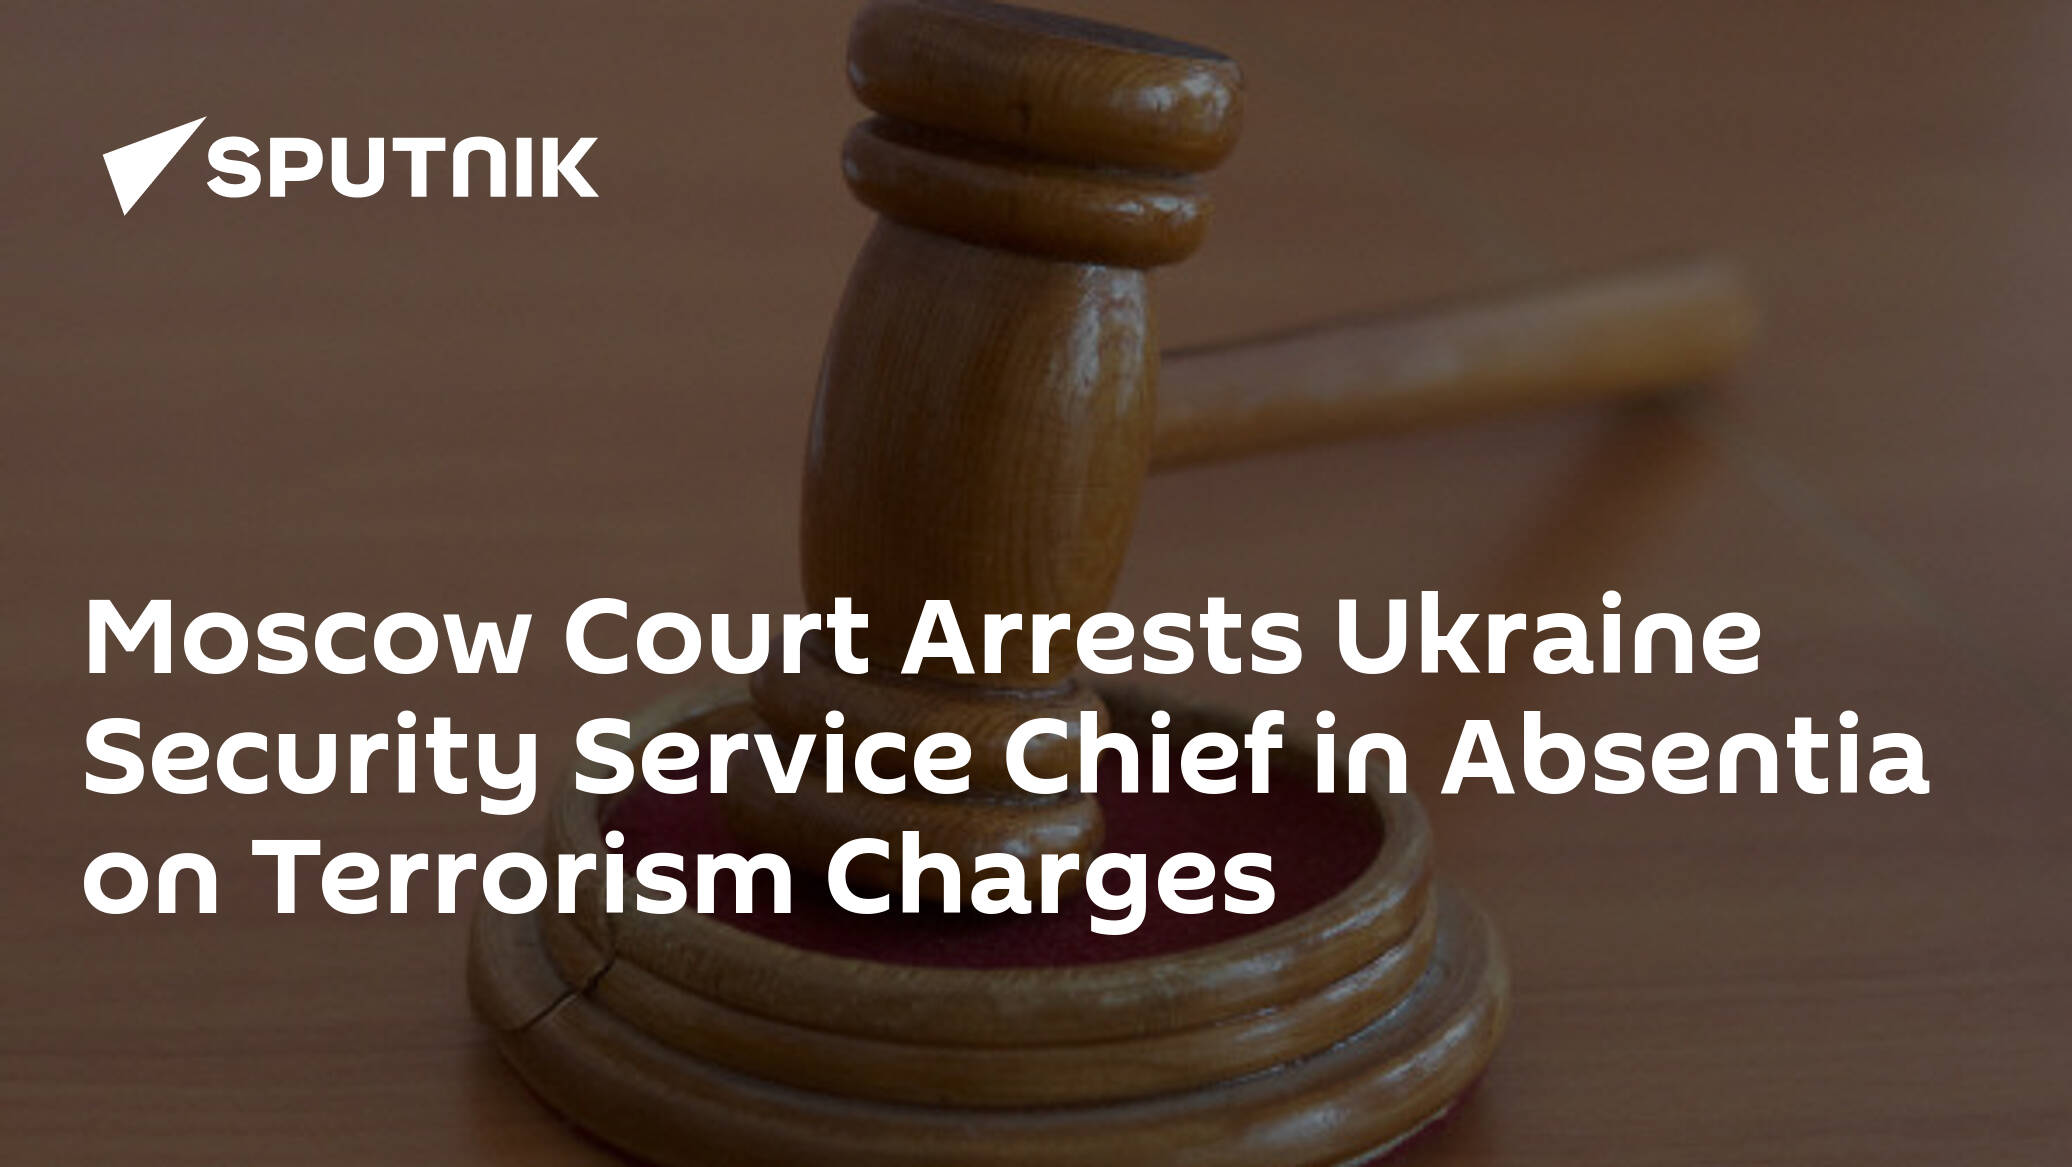 Moscow Court Arrests Ukraine Security Service Chief in Absentia on Terrorism Charges